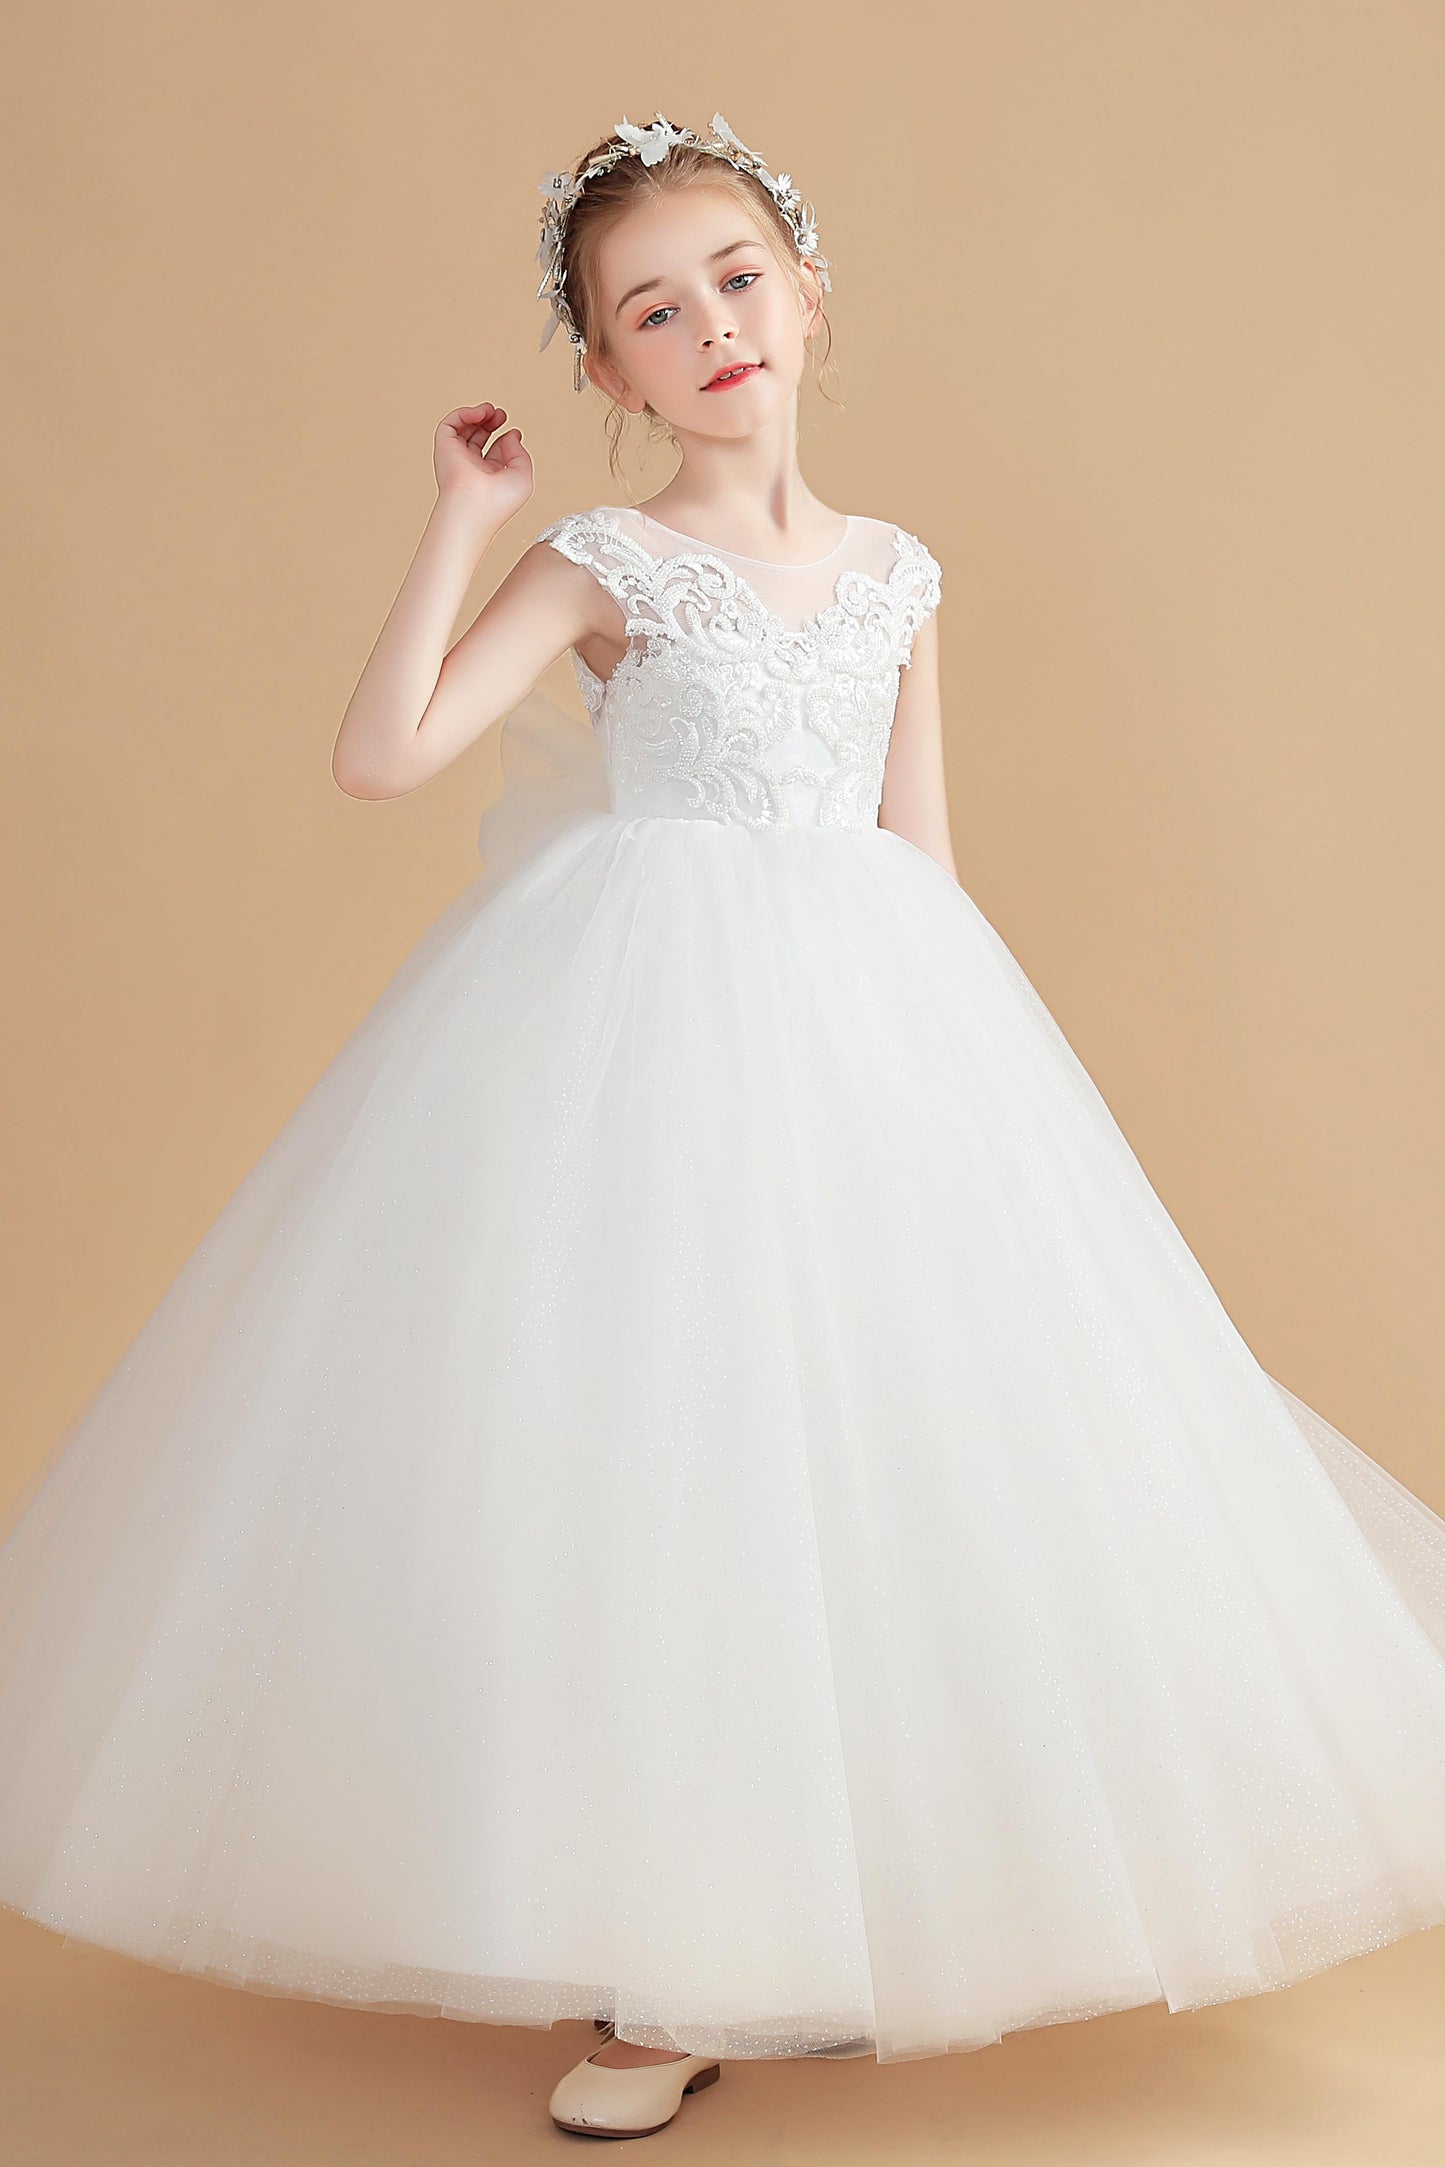 Cap Sleeves Ivory Tulle Flower Girl Dresses With Bow-Knot